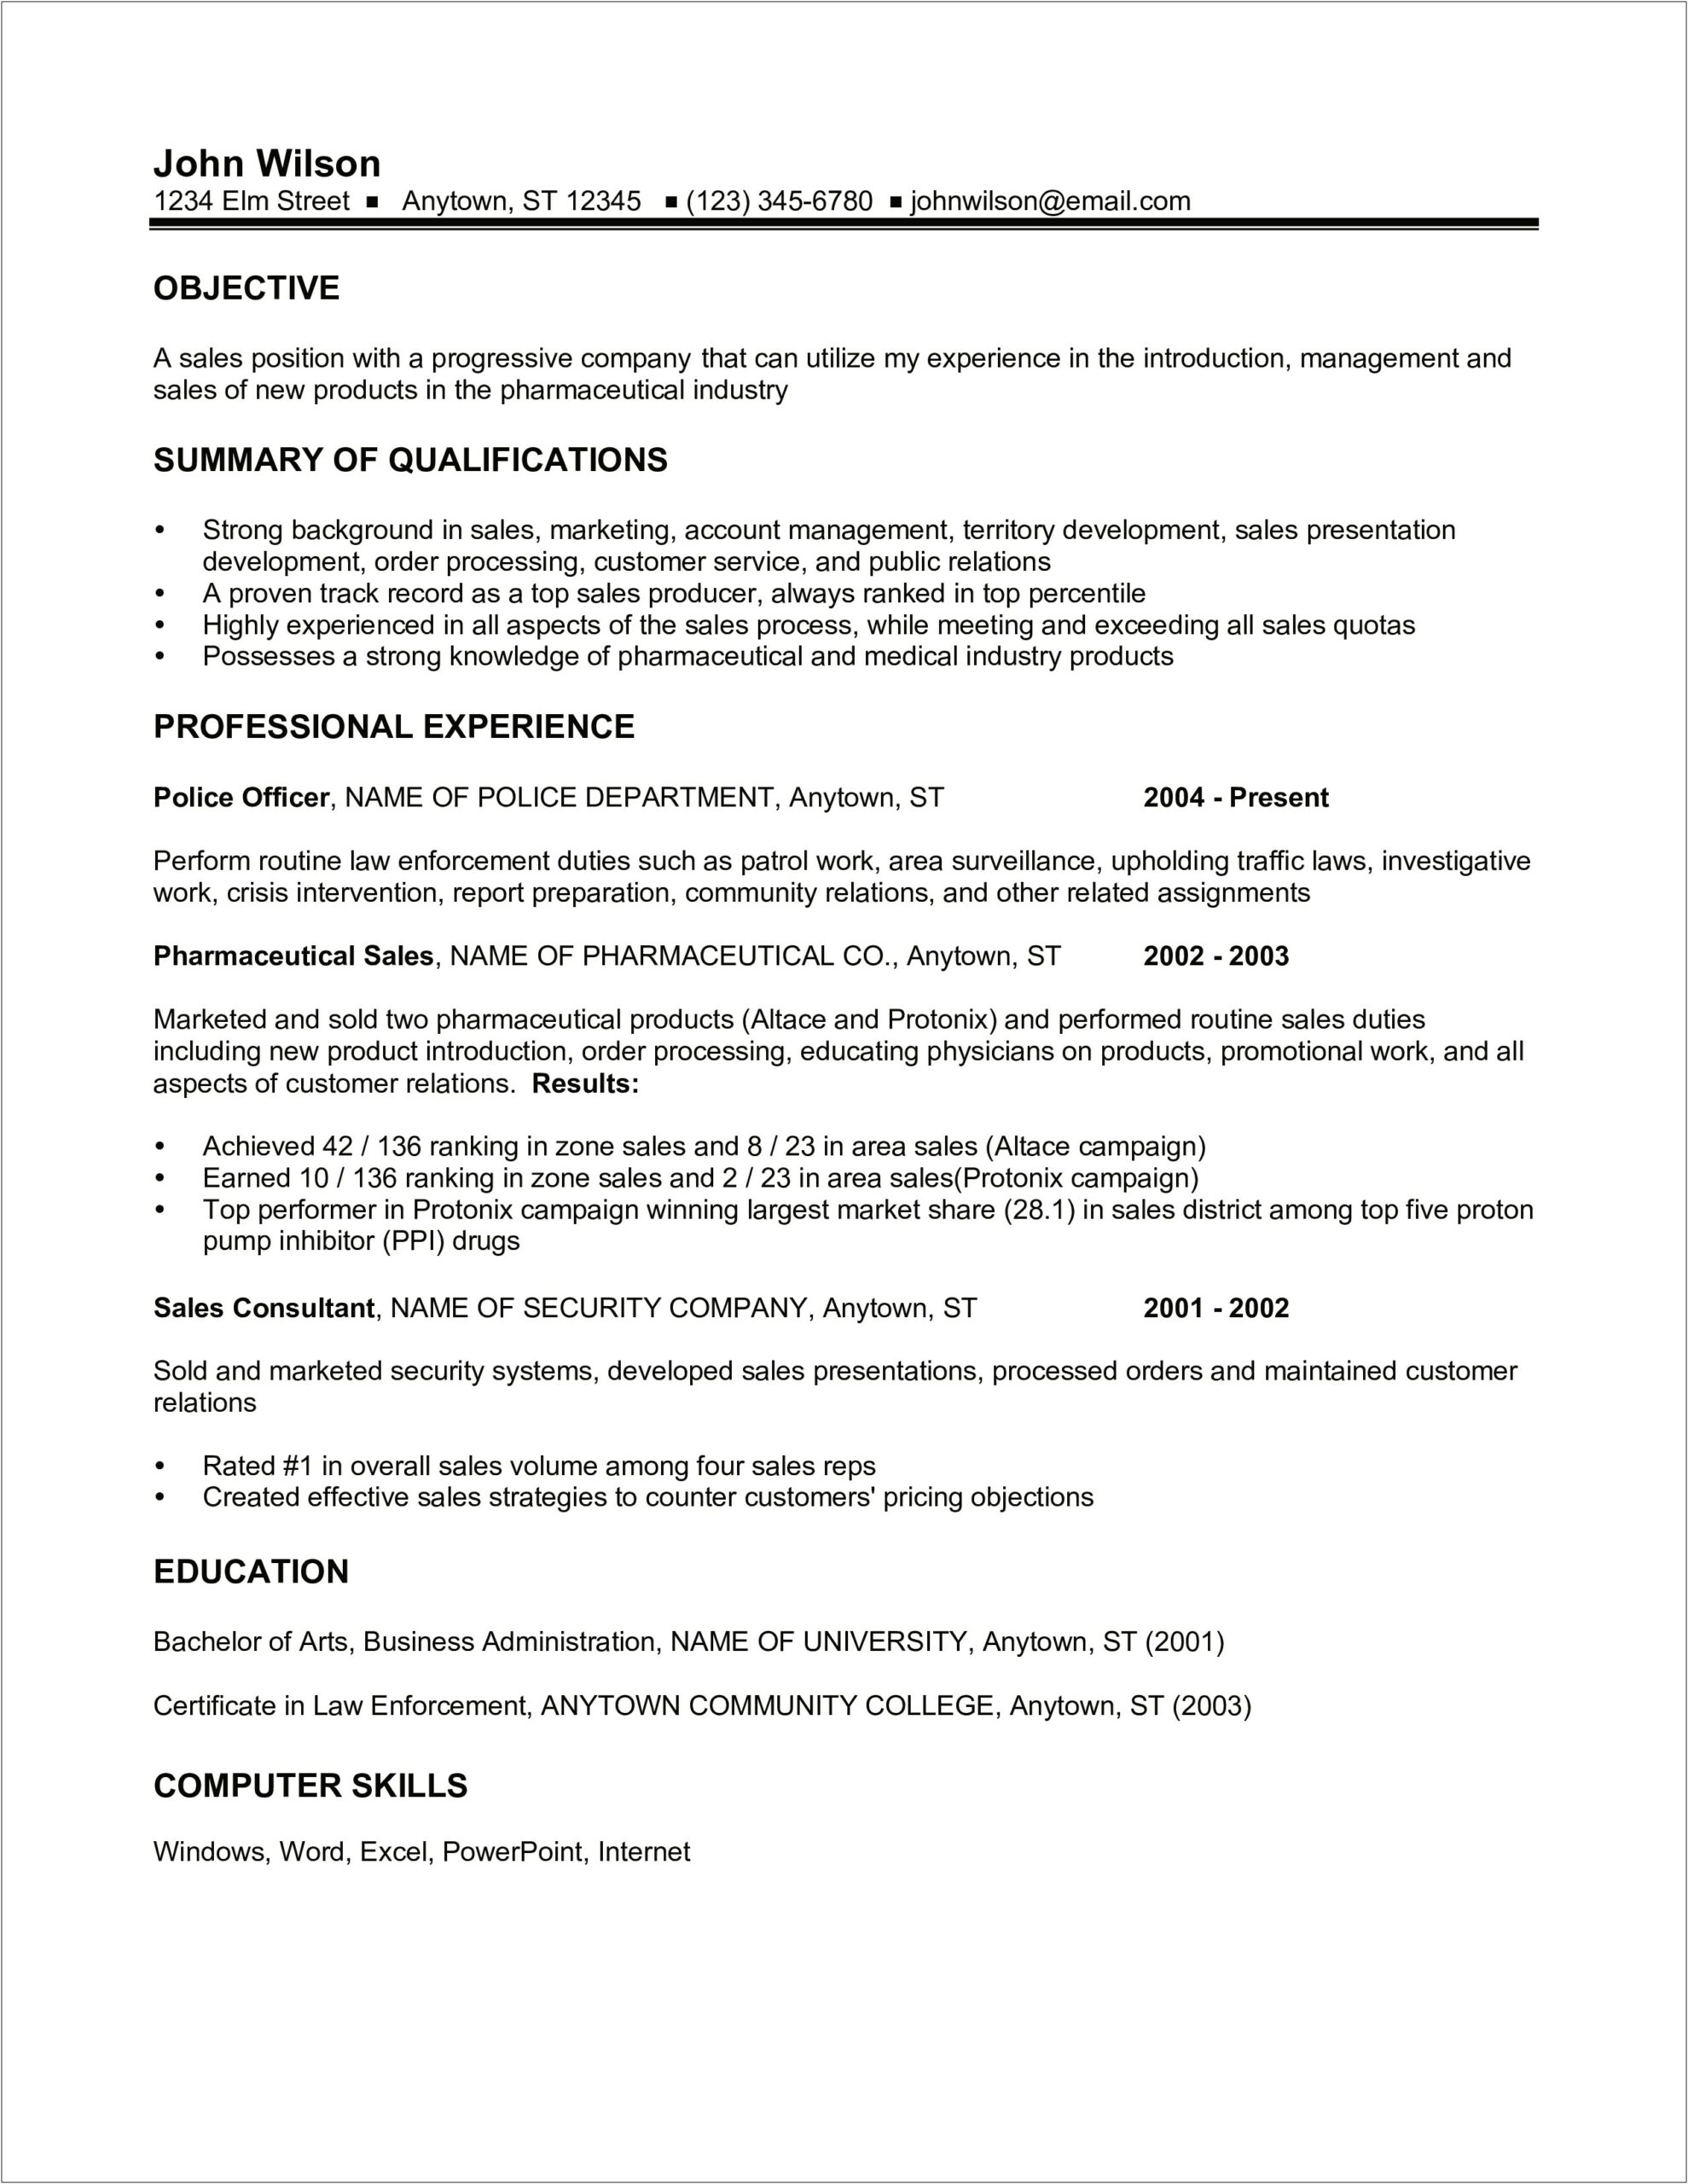 Resume Template For Experienced Sales Professional